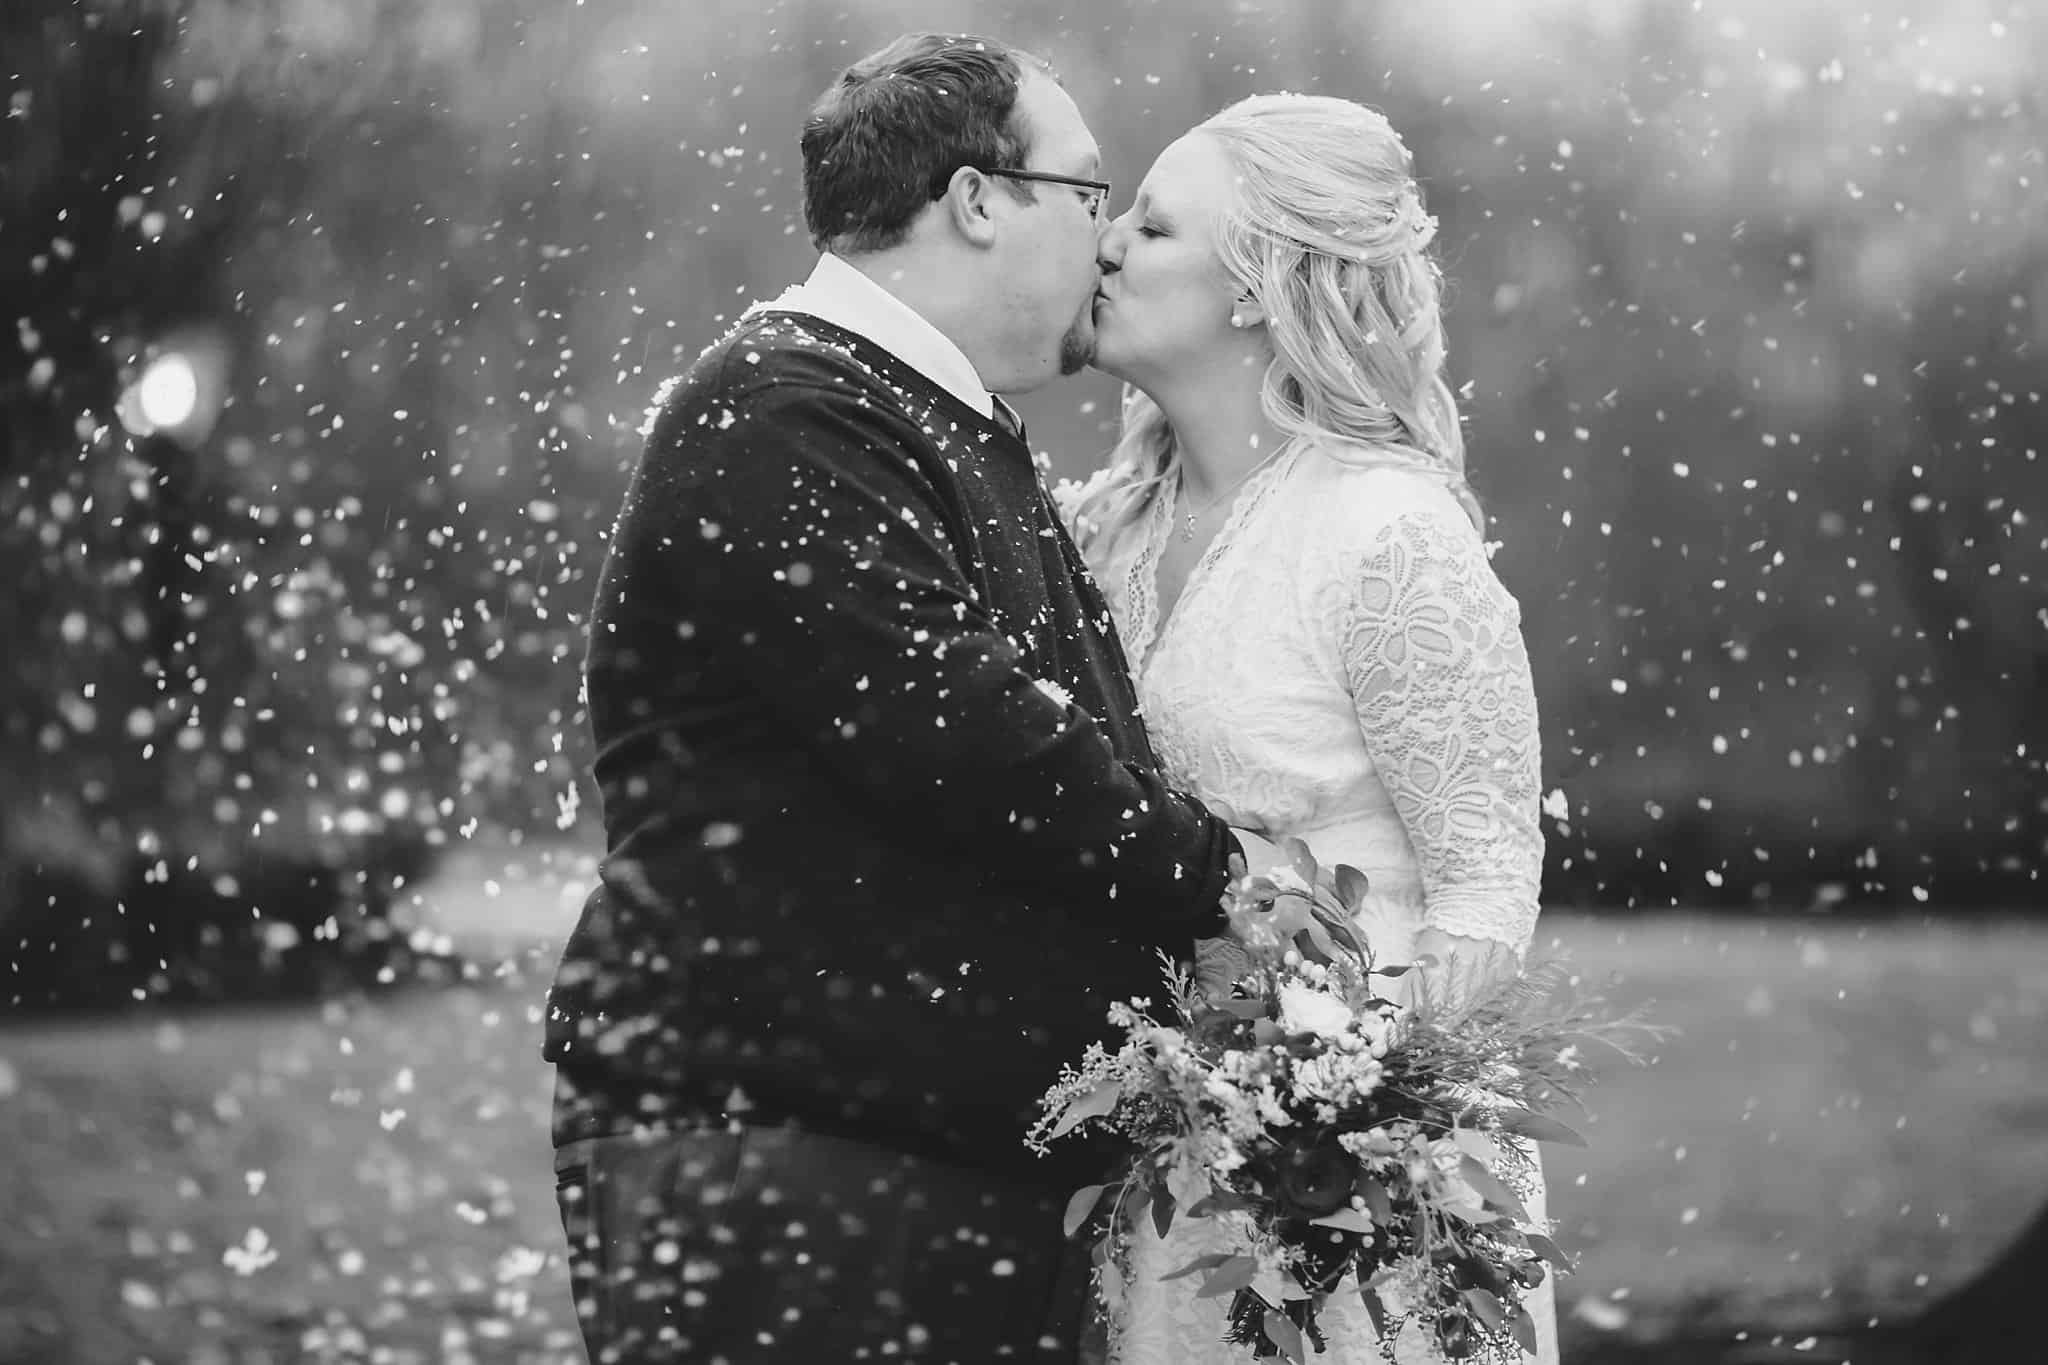 Amanda & Chandler - Wintery Wedding at Duck Pond Manor in Sparta, Tennessee - Lindsay ...2048 x 1365